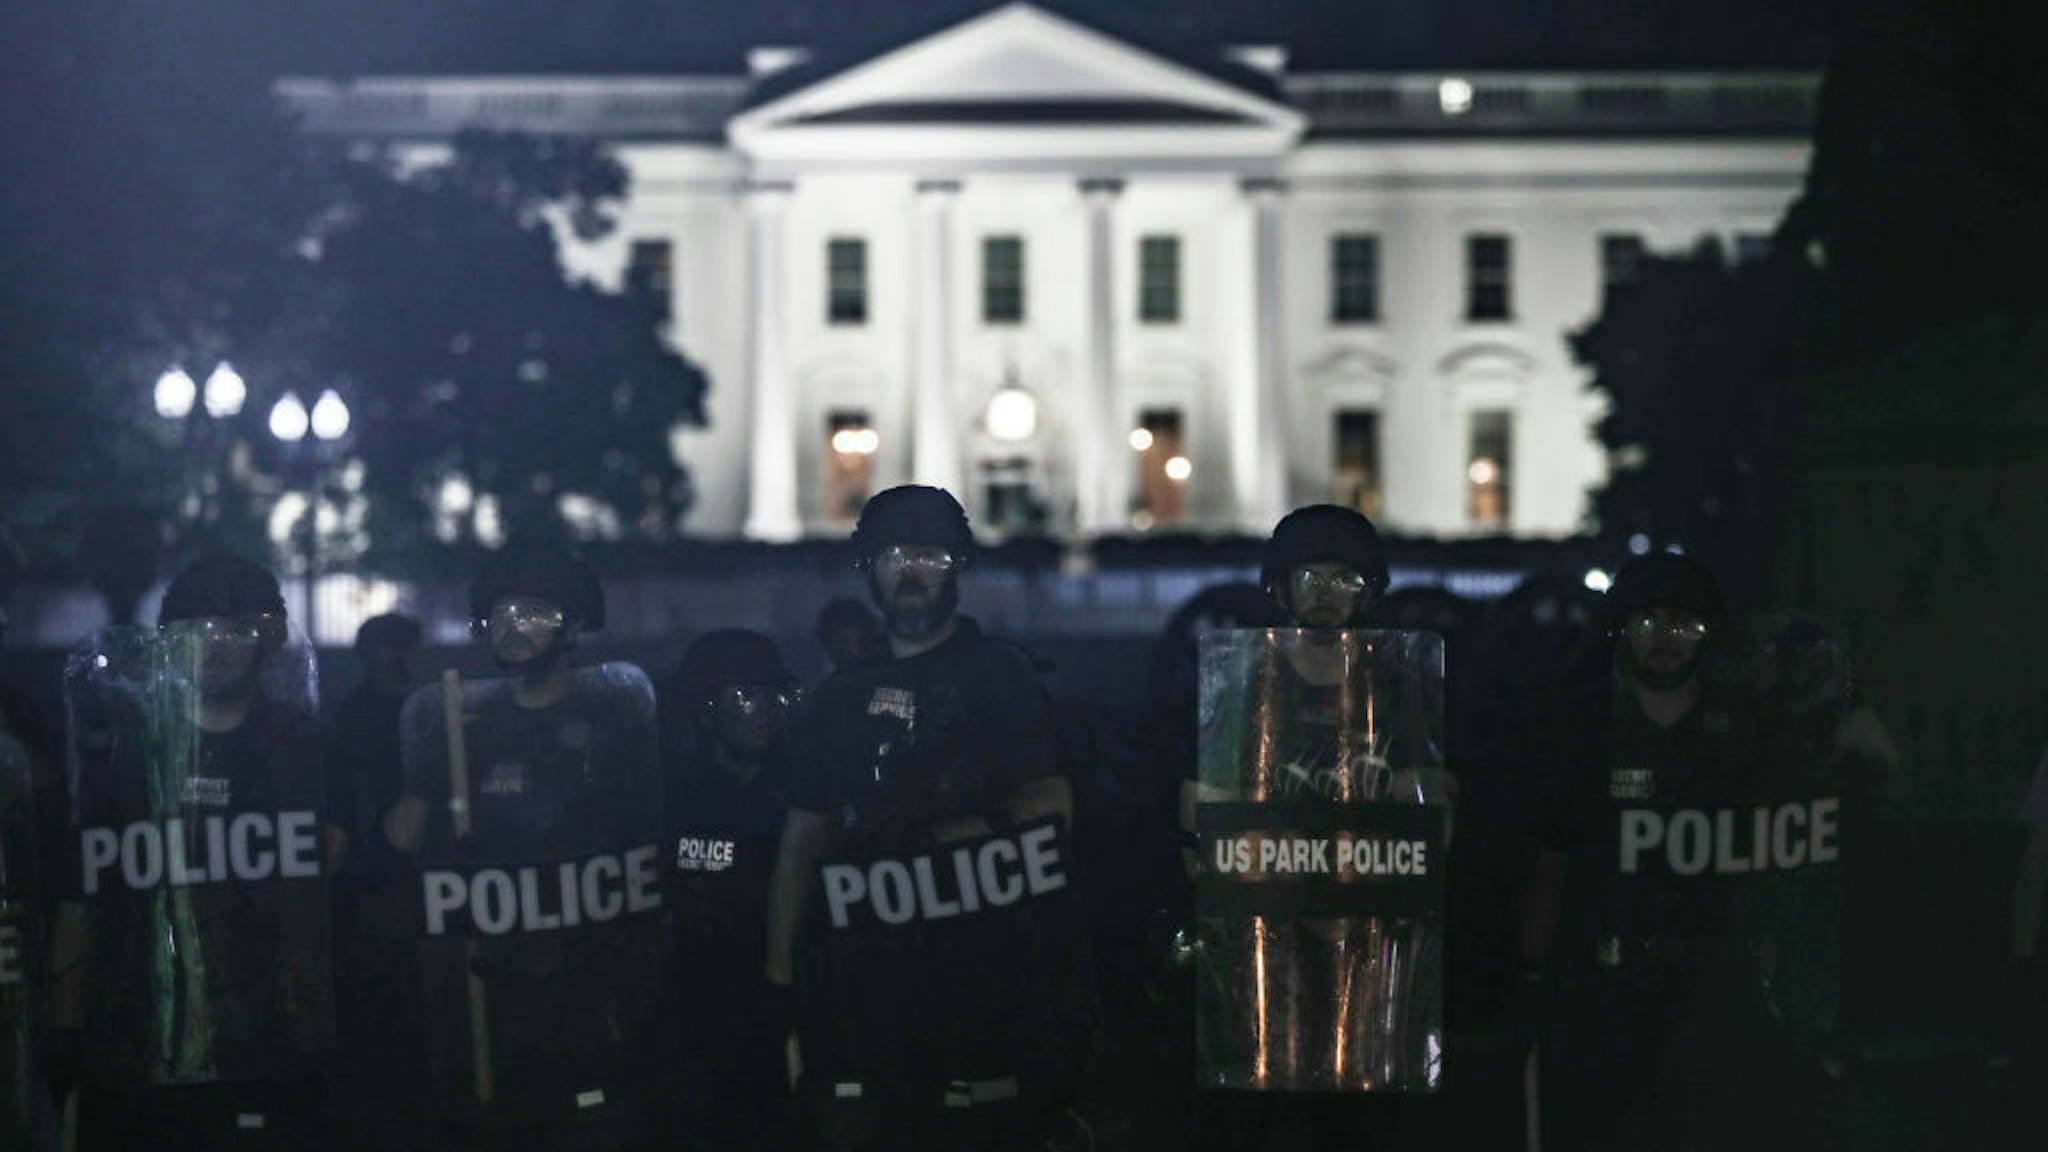 Police take security measures near White House during a protest over the death of George Floyd, an unarmed black man who died after being pinned down by a white police officer in Washington, United States on June 1, 2020. (Photo by Yasin Ozturk/Anadolu Agency via Getty Images)